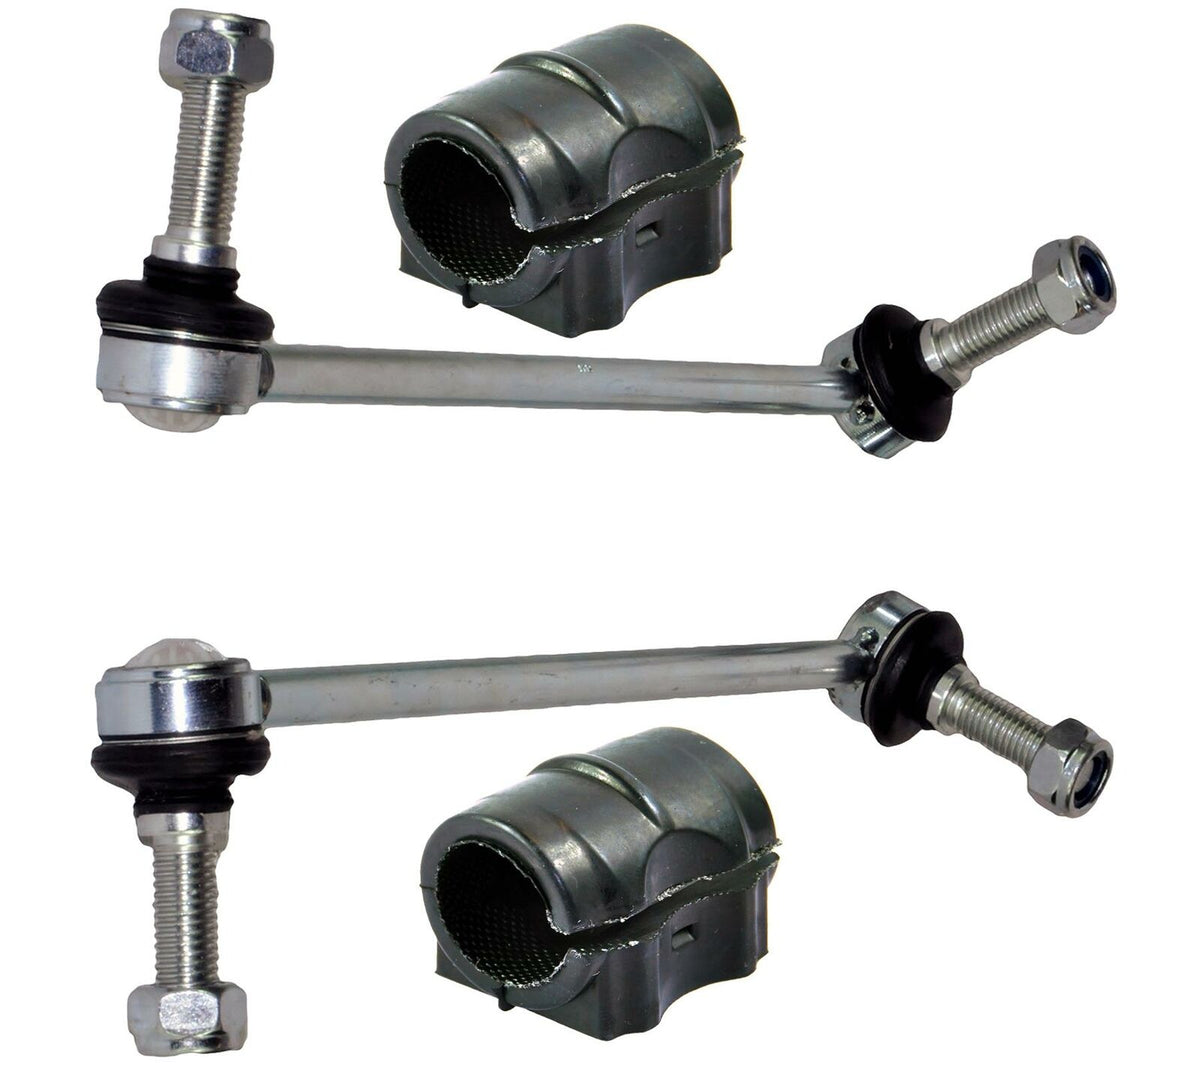 Pair Of Front Stabiliser Anti Roll Bar Drop Links For Discovery Mk3 & Range Rover Sport Rbm500140-150